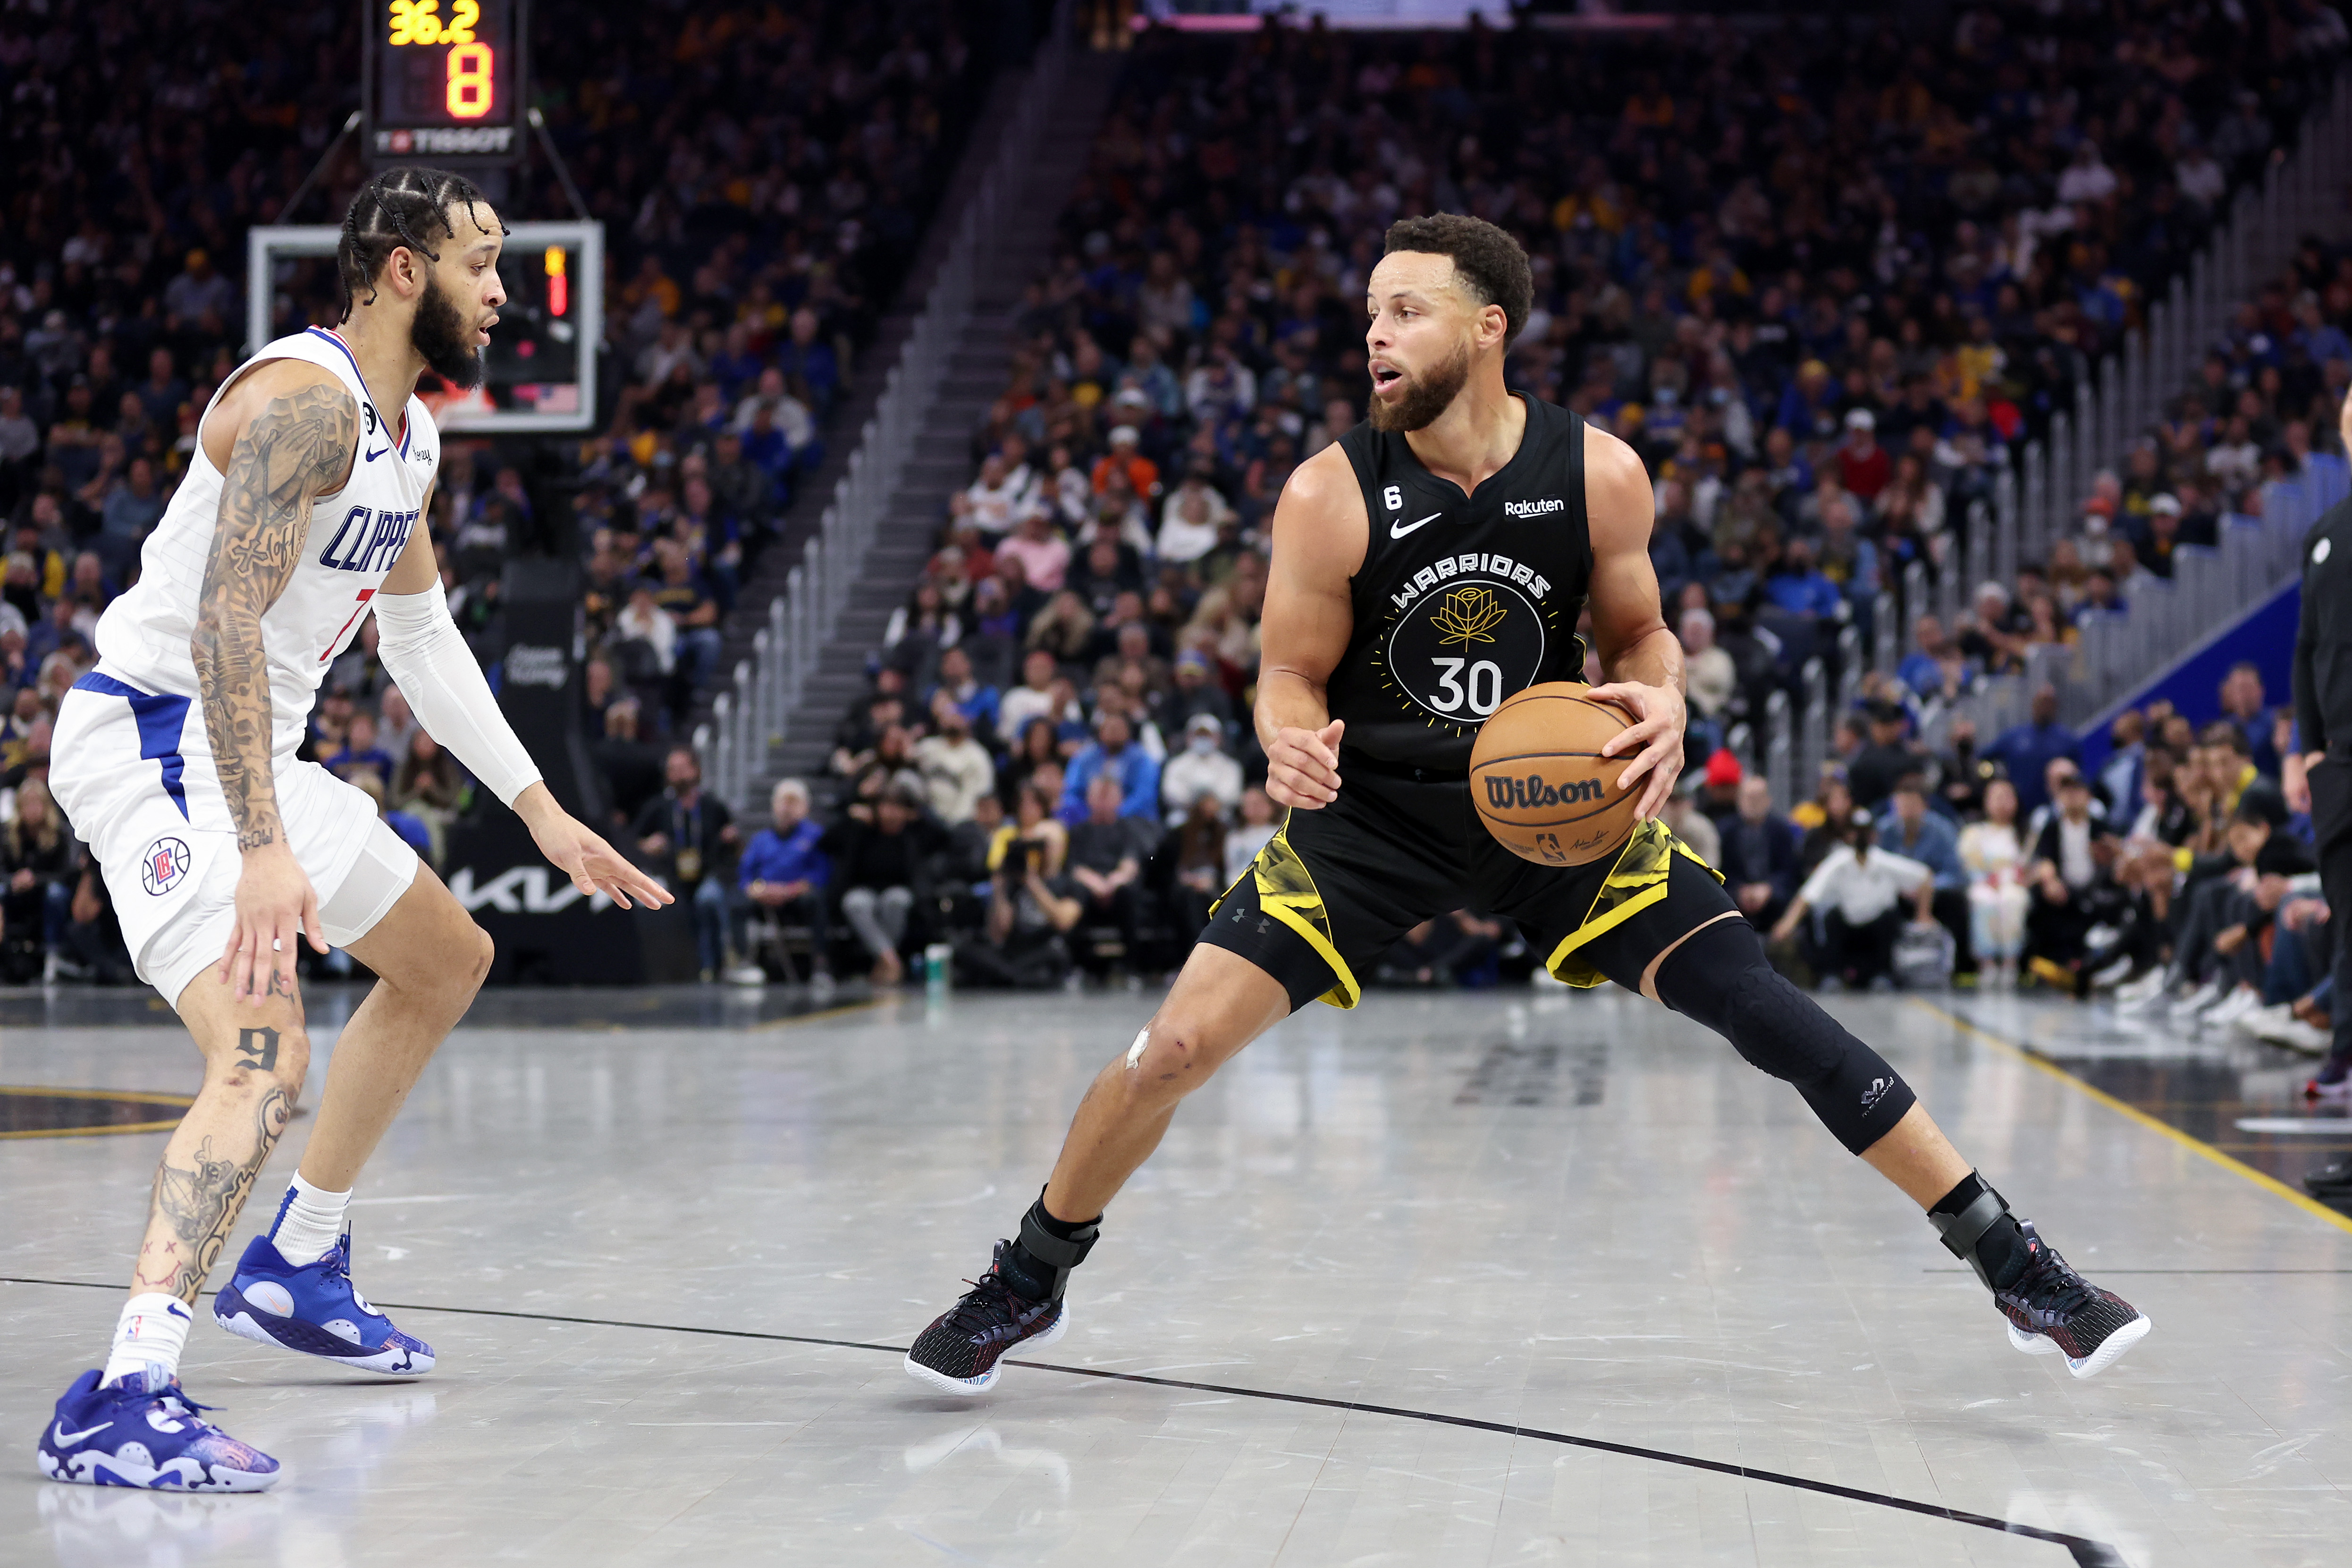 Stephen Curry of the Golden State Warriors is guarded by Amir Coffey of the LA Clippers at Chase Center on November 23, 2022 in San Francisco, California.